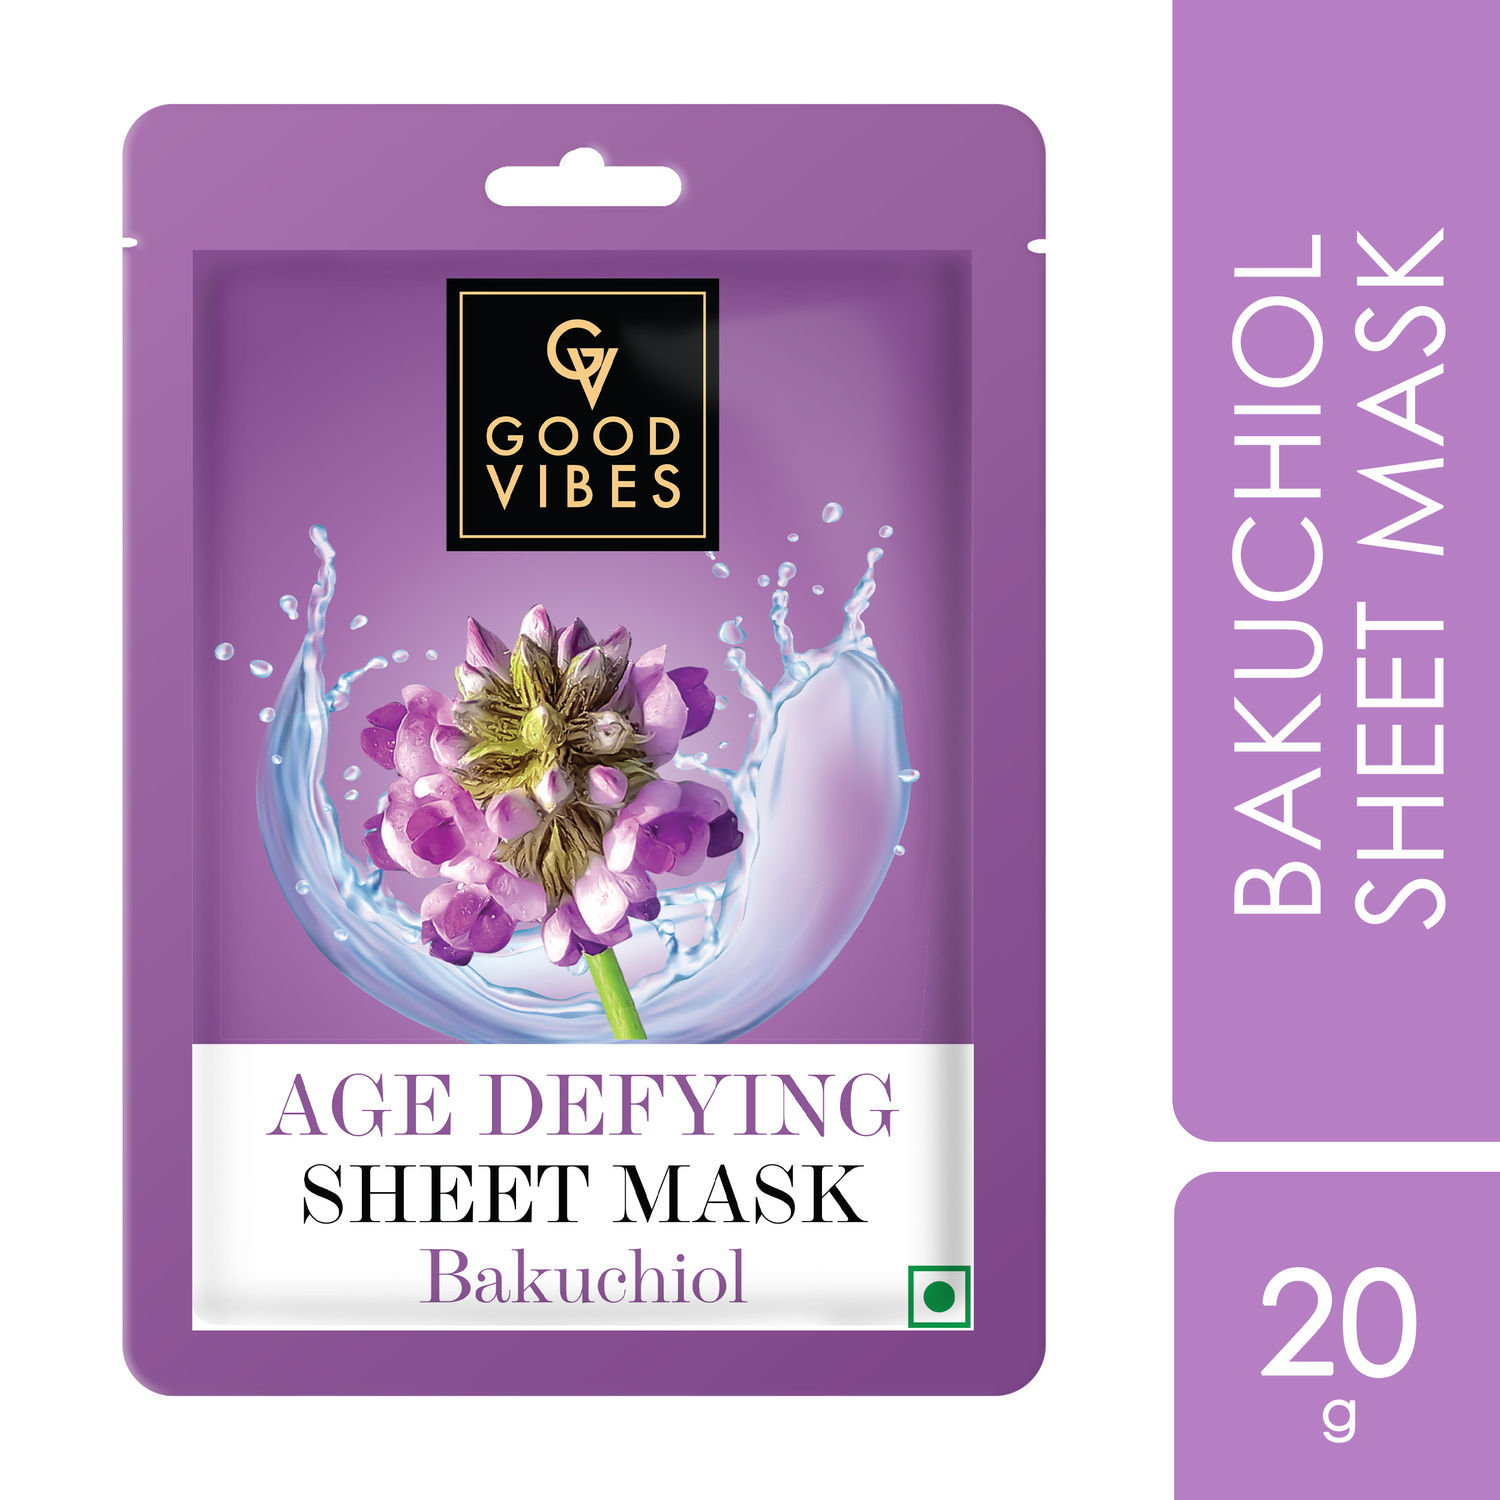 Good Vibes Bakuchiol Age Defying Sheet Mask | For Soft & Smooth Skin | Fights Signs Of Ageing (20 ml)